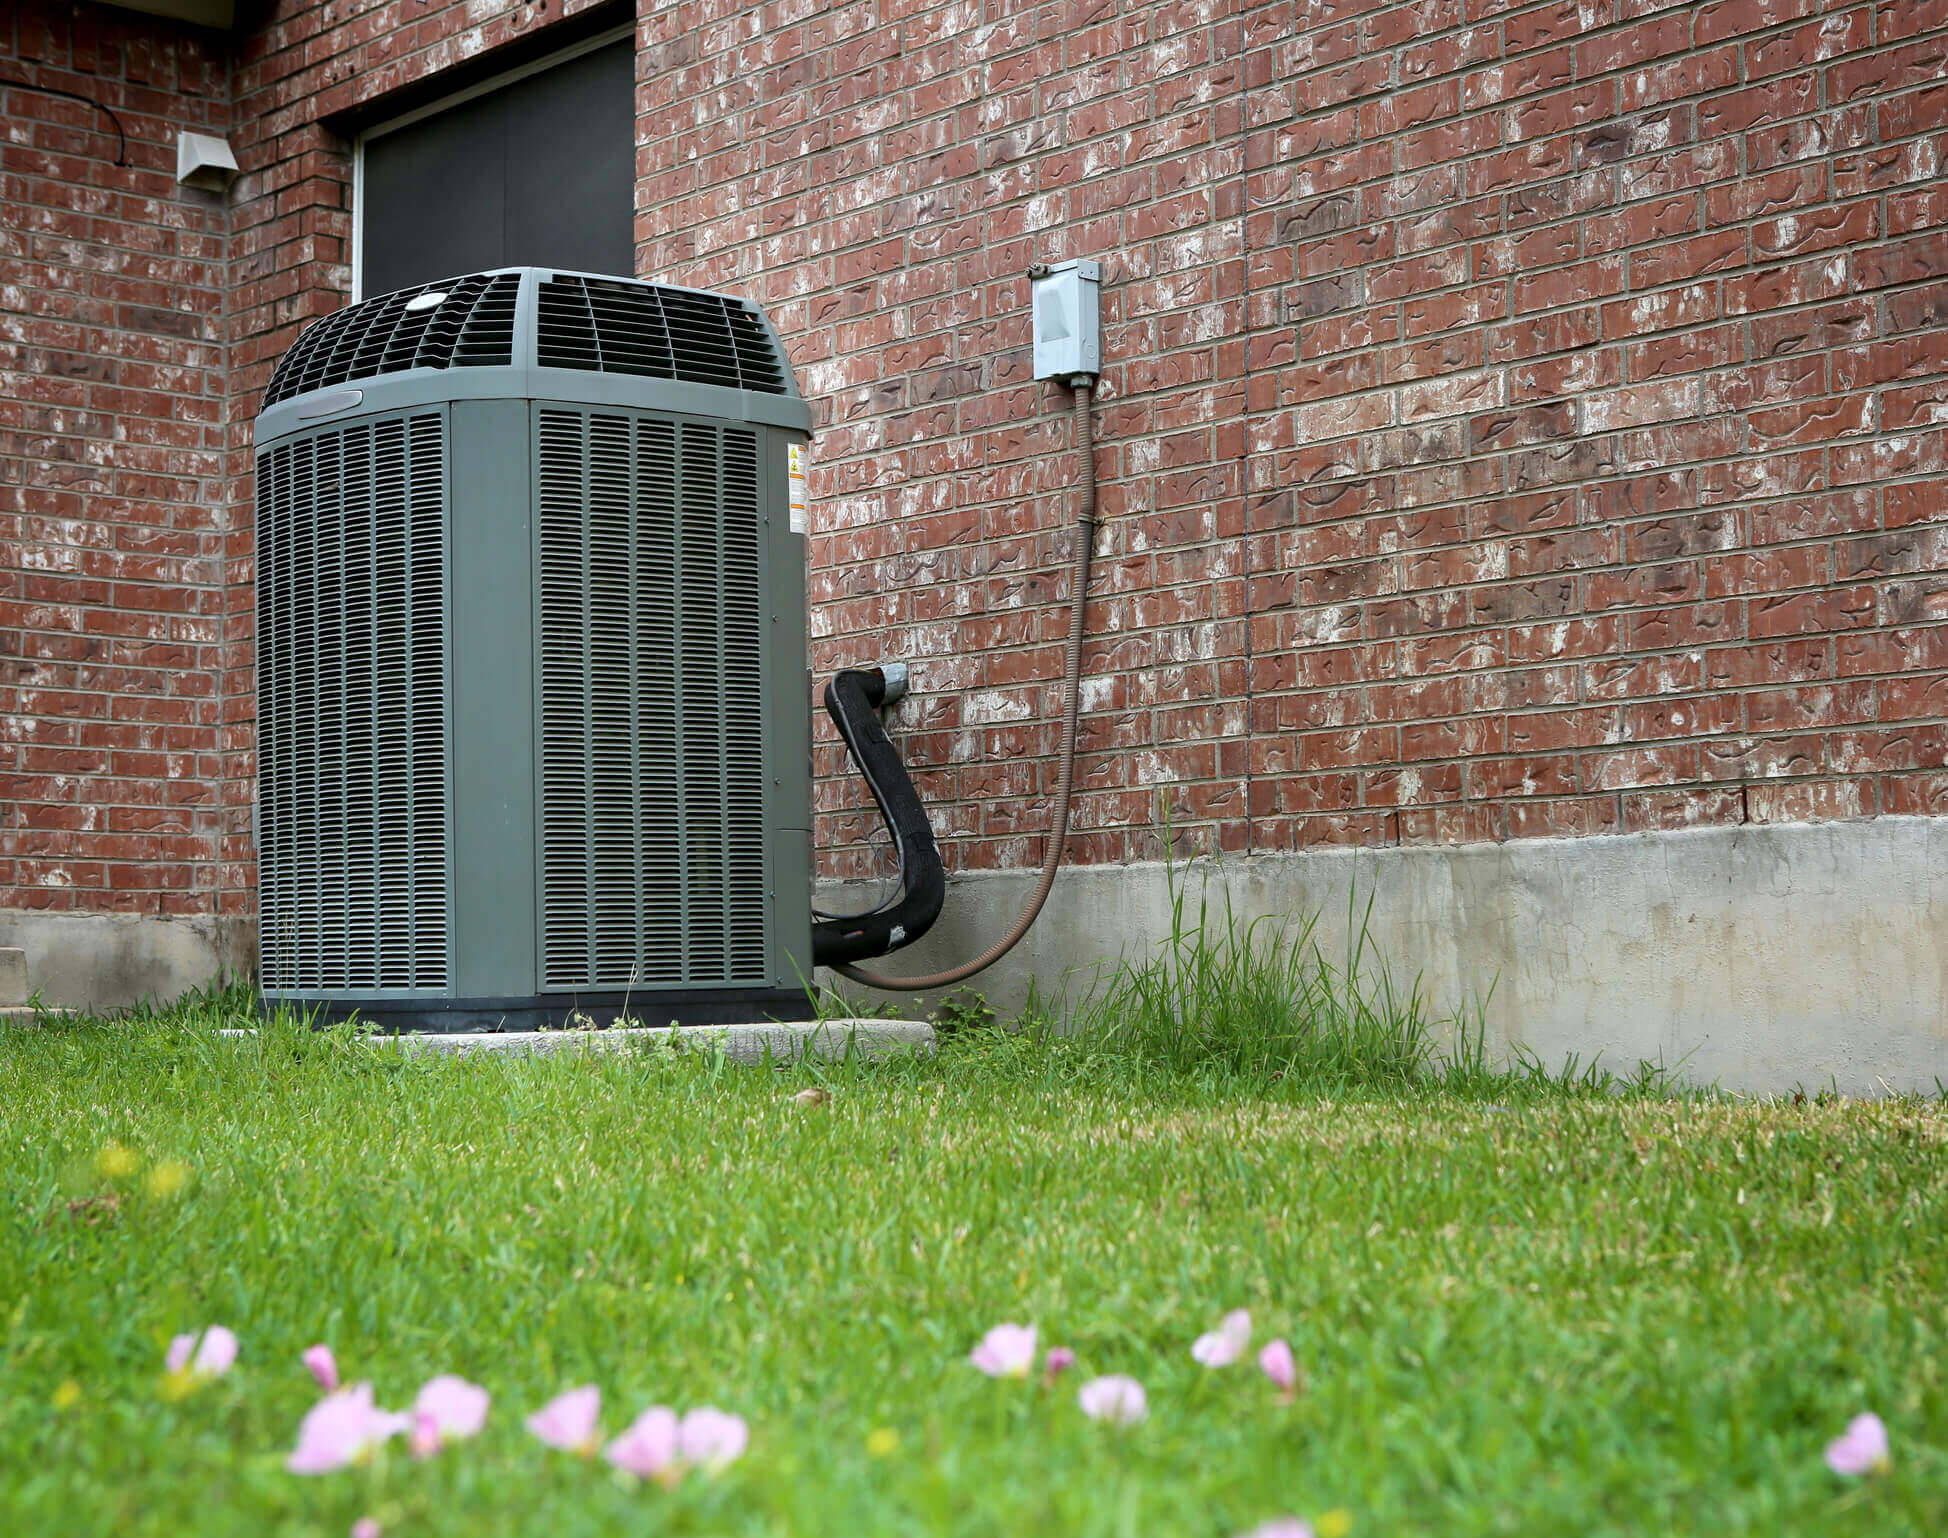 image of air conditioning unit outdoors